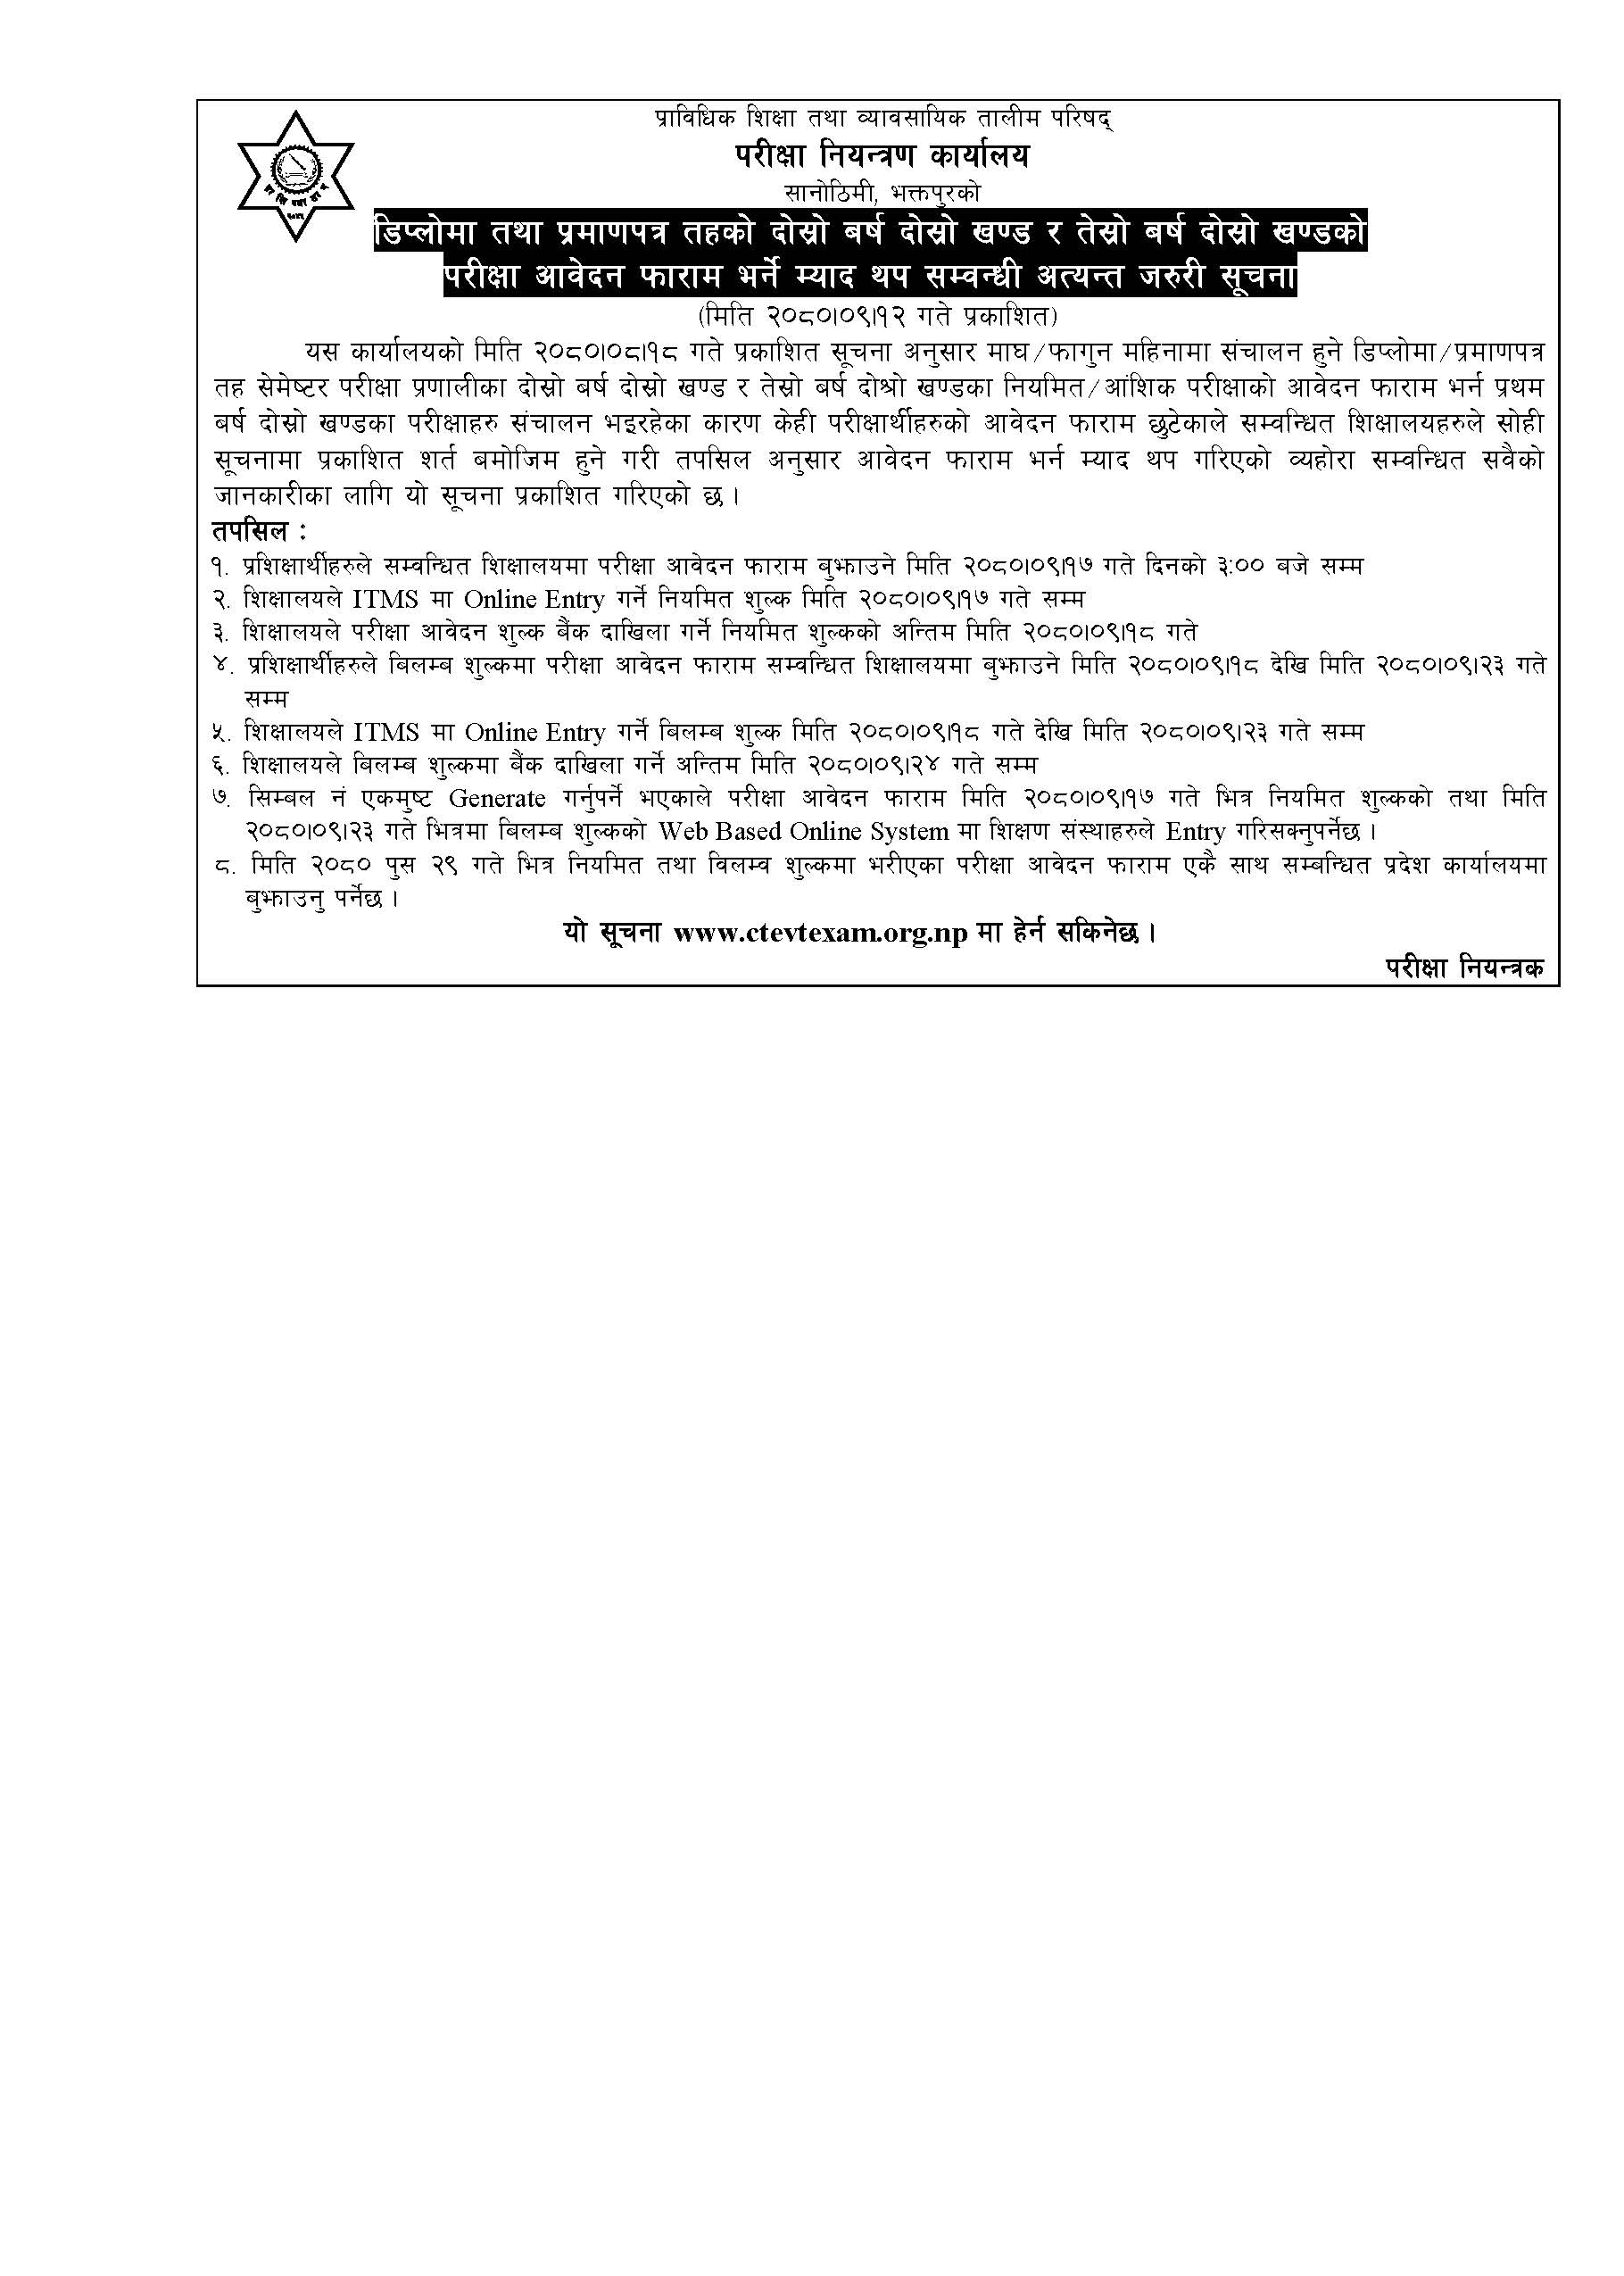 Diploma level II II III II Exam form submission date extended Notice 2080 09 11